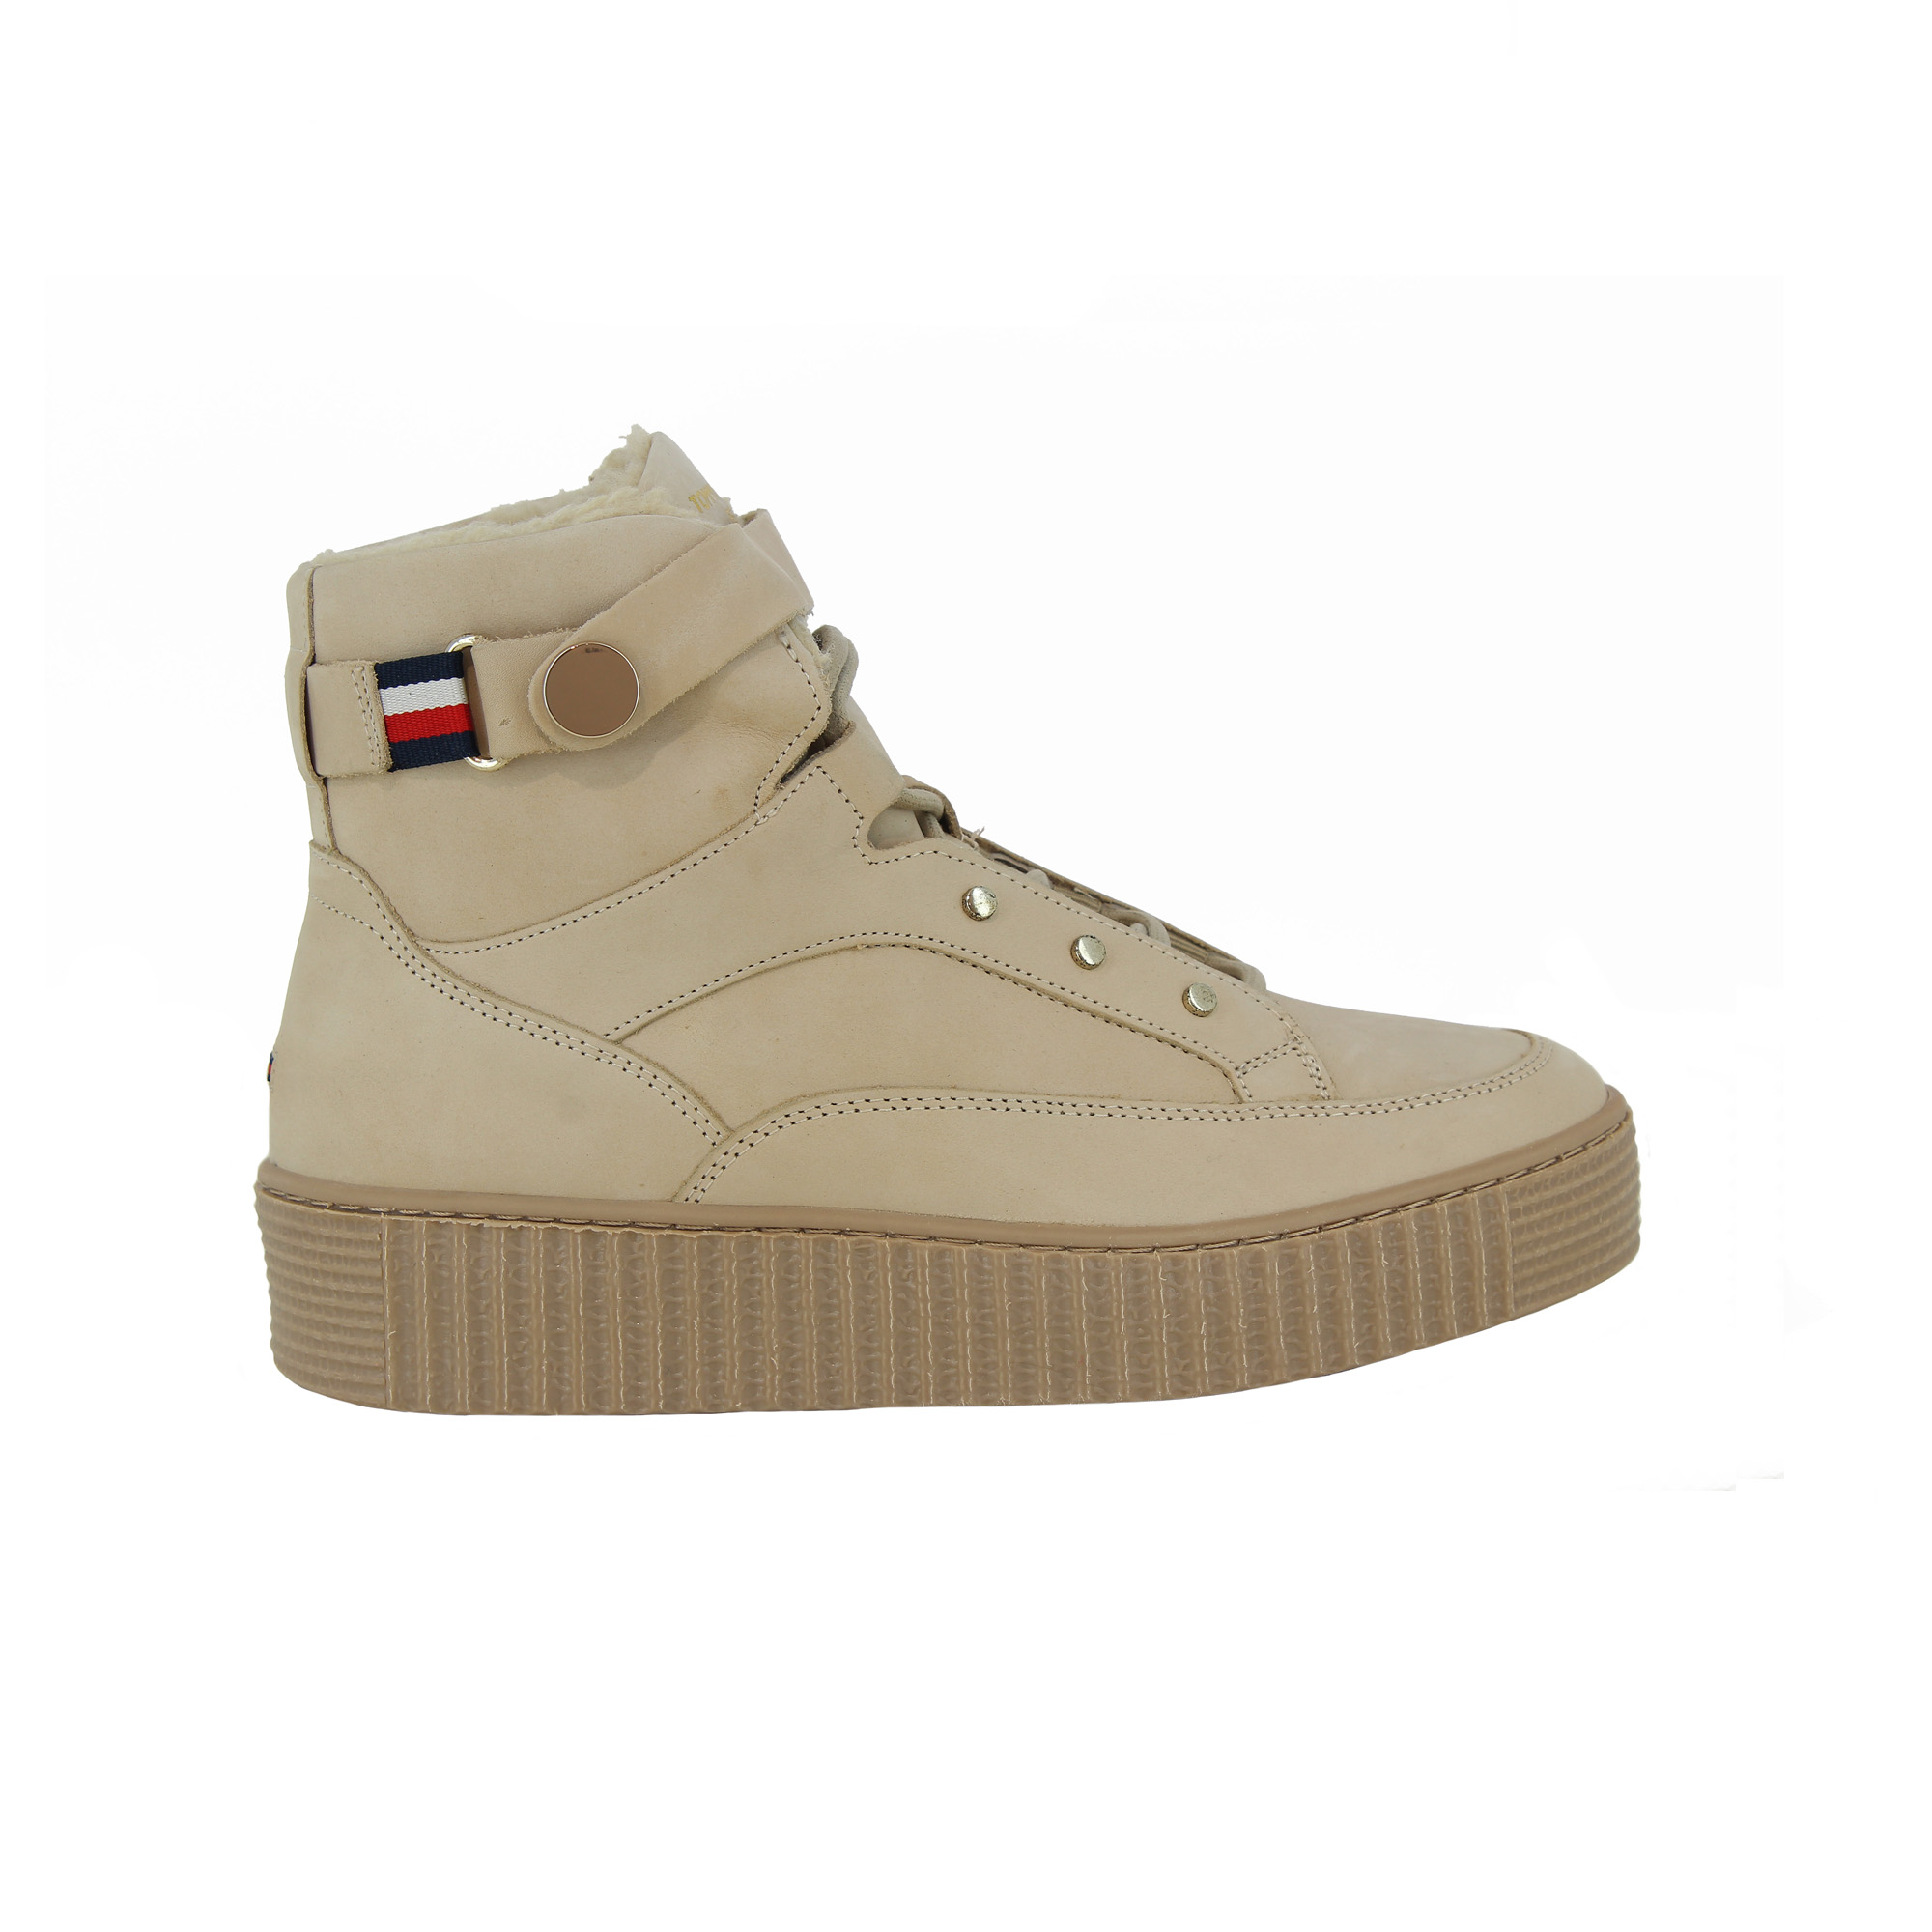 Hilfiger Tommy UP LACE WARMLINED Beige BOOT Classic